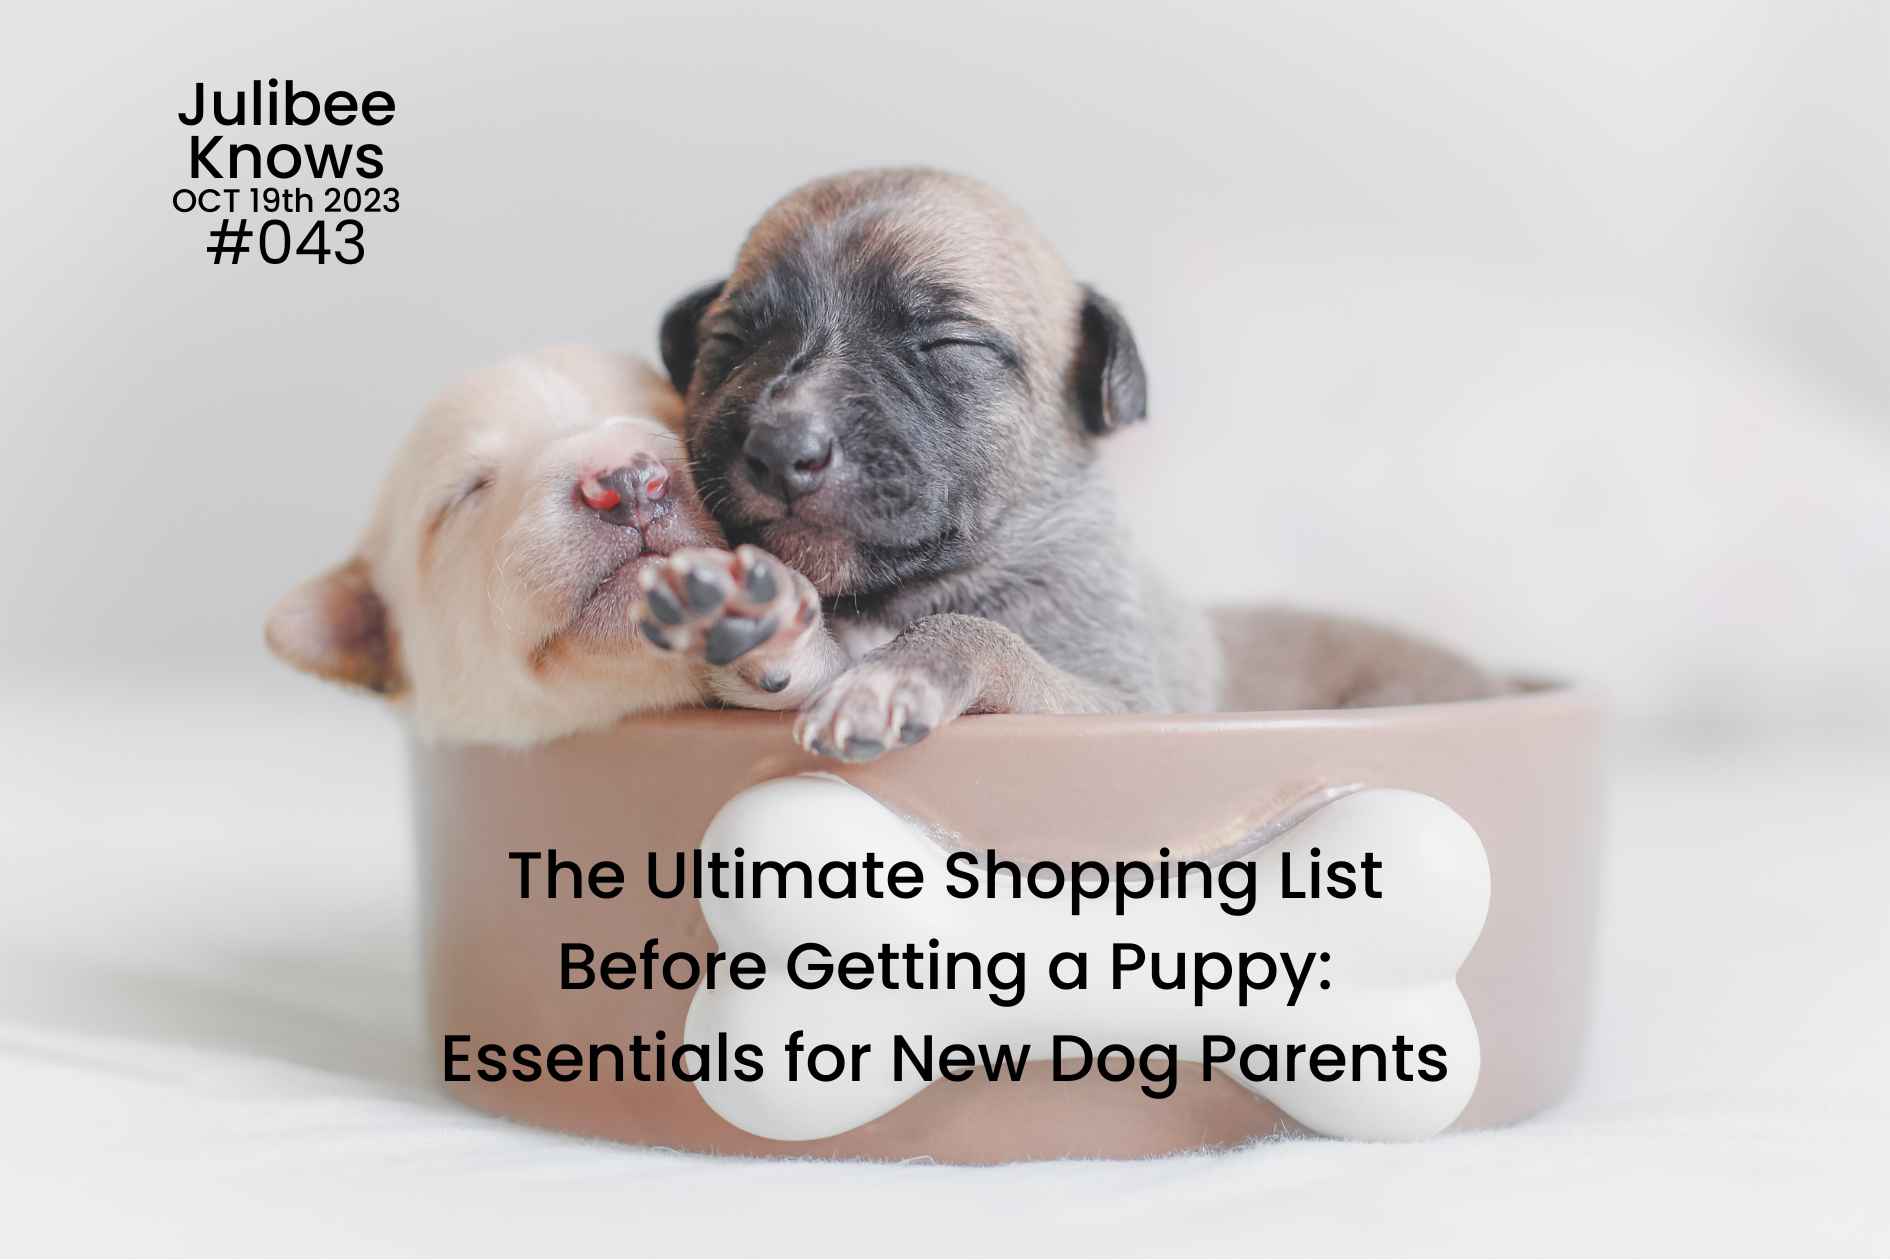 The Ultimate Shopping List Before Getting a Puppy: Essentials for New Dog Parents